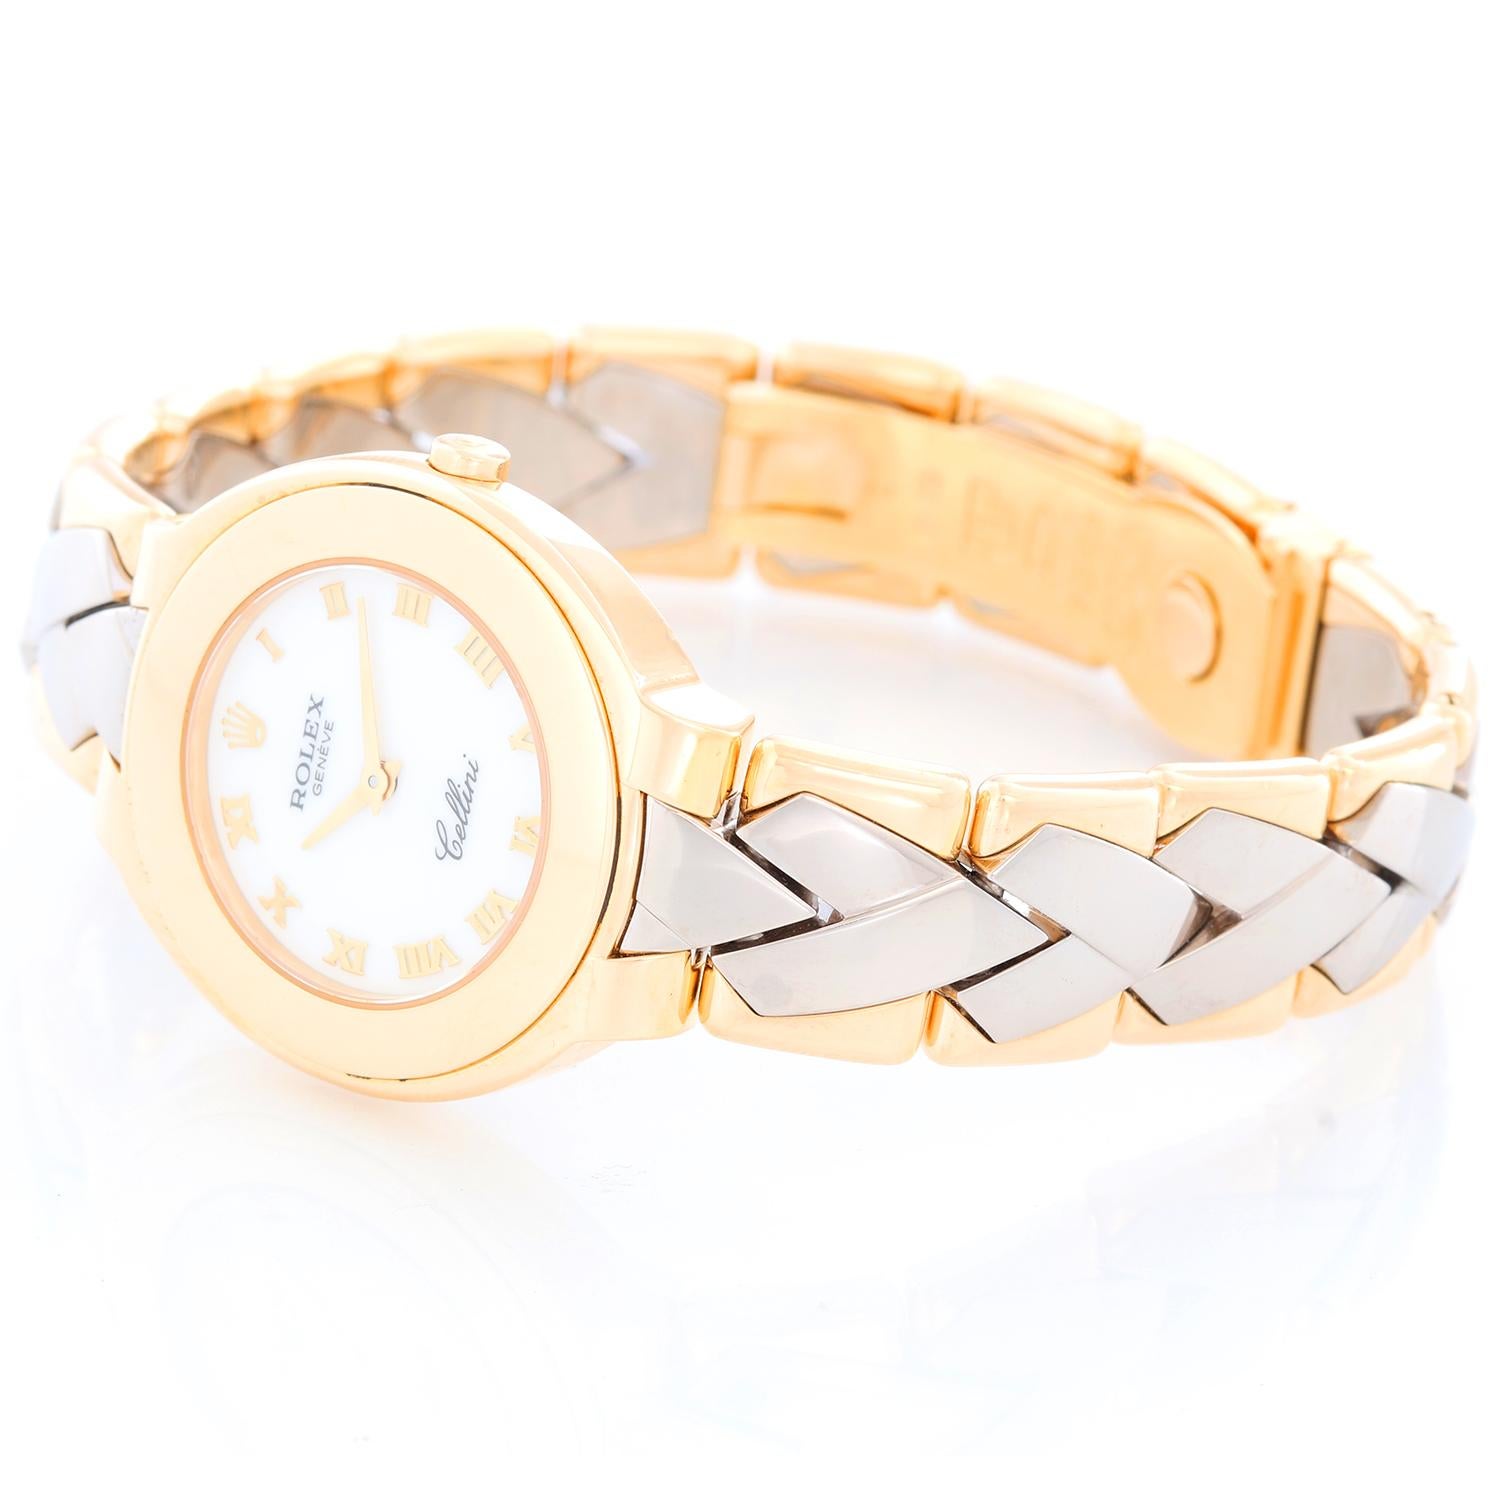 Extremely Rare Rolex Cellini Ladies 18k Yellow Gold & White Gold Watch 6651 - Quartz. 18k yellow gold case (29mm diameter). White dial with gold raised roman numerals. White gold and yellow gold bracelet; measures a 7 1/4 inch wrist. Pre-owned with